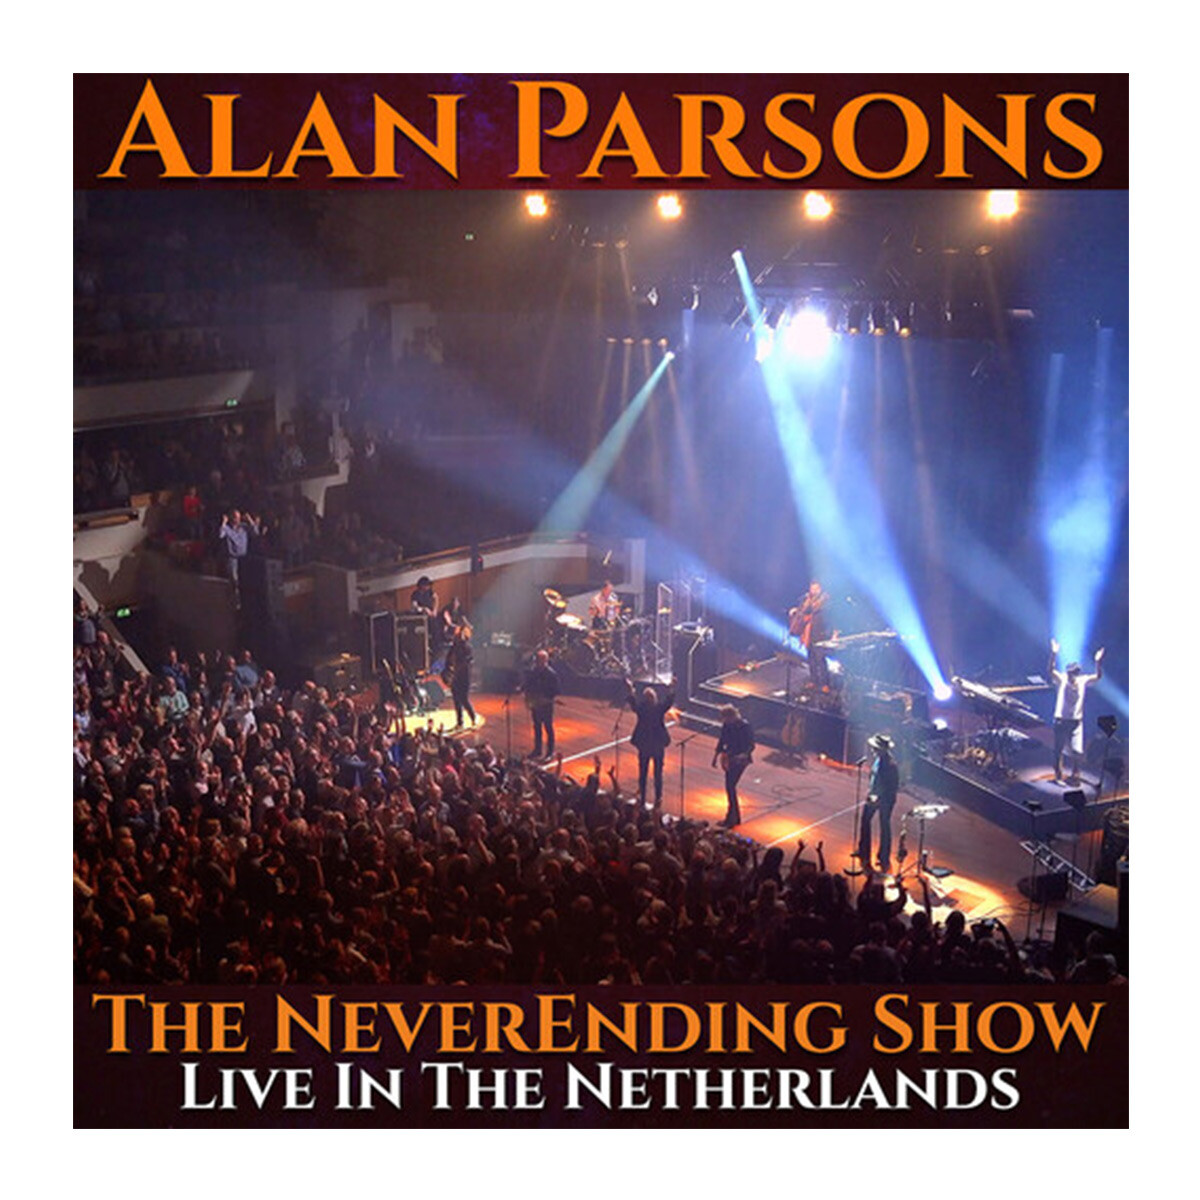 Parsons, Alan - Neverending Show: Live In The Netherlands - Cd 